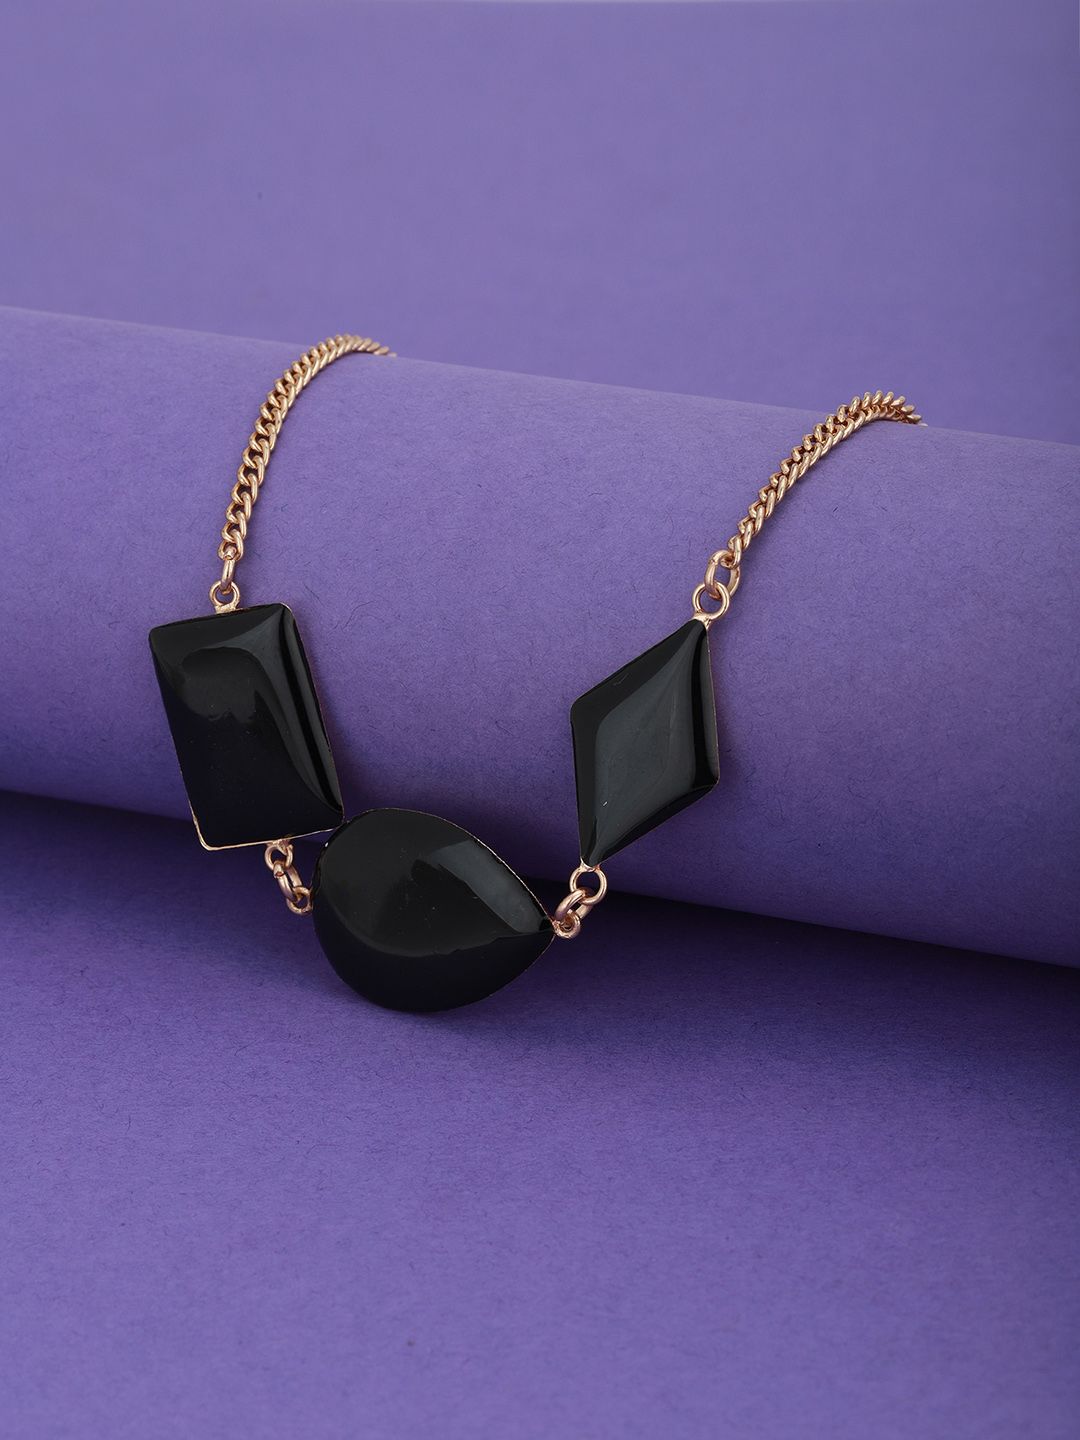 Carlton London Black Gold-Plated Enamelled Necklace Price in India